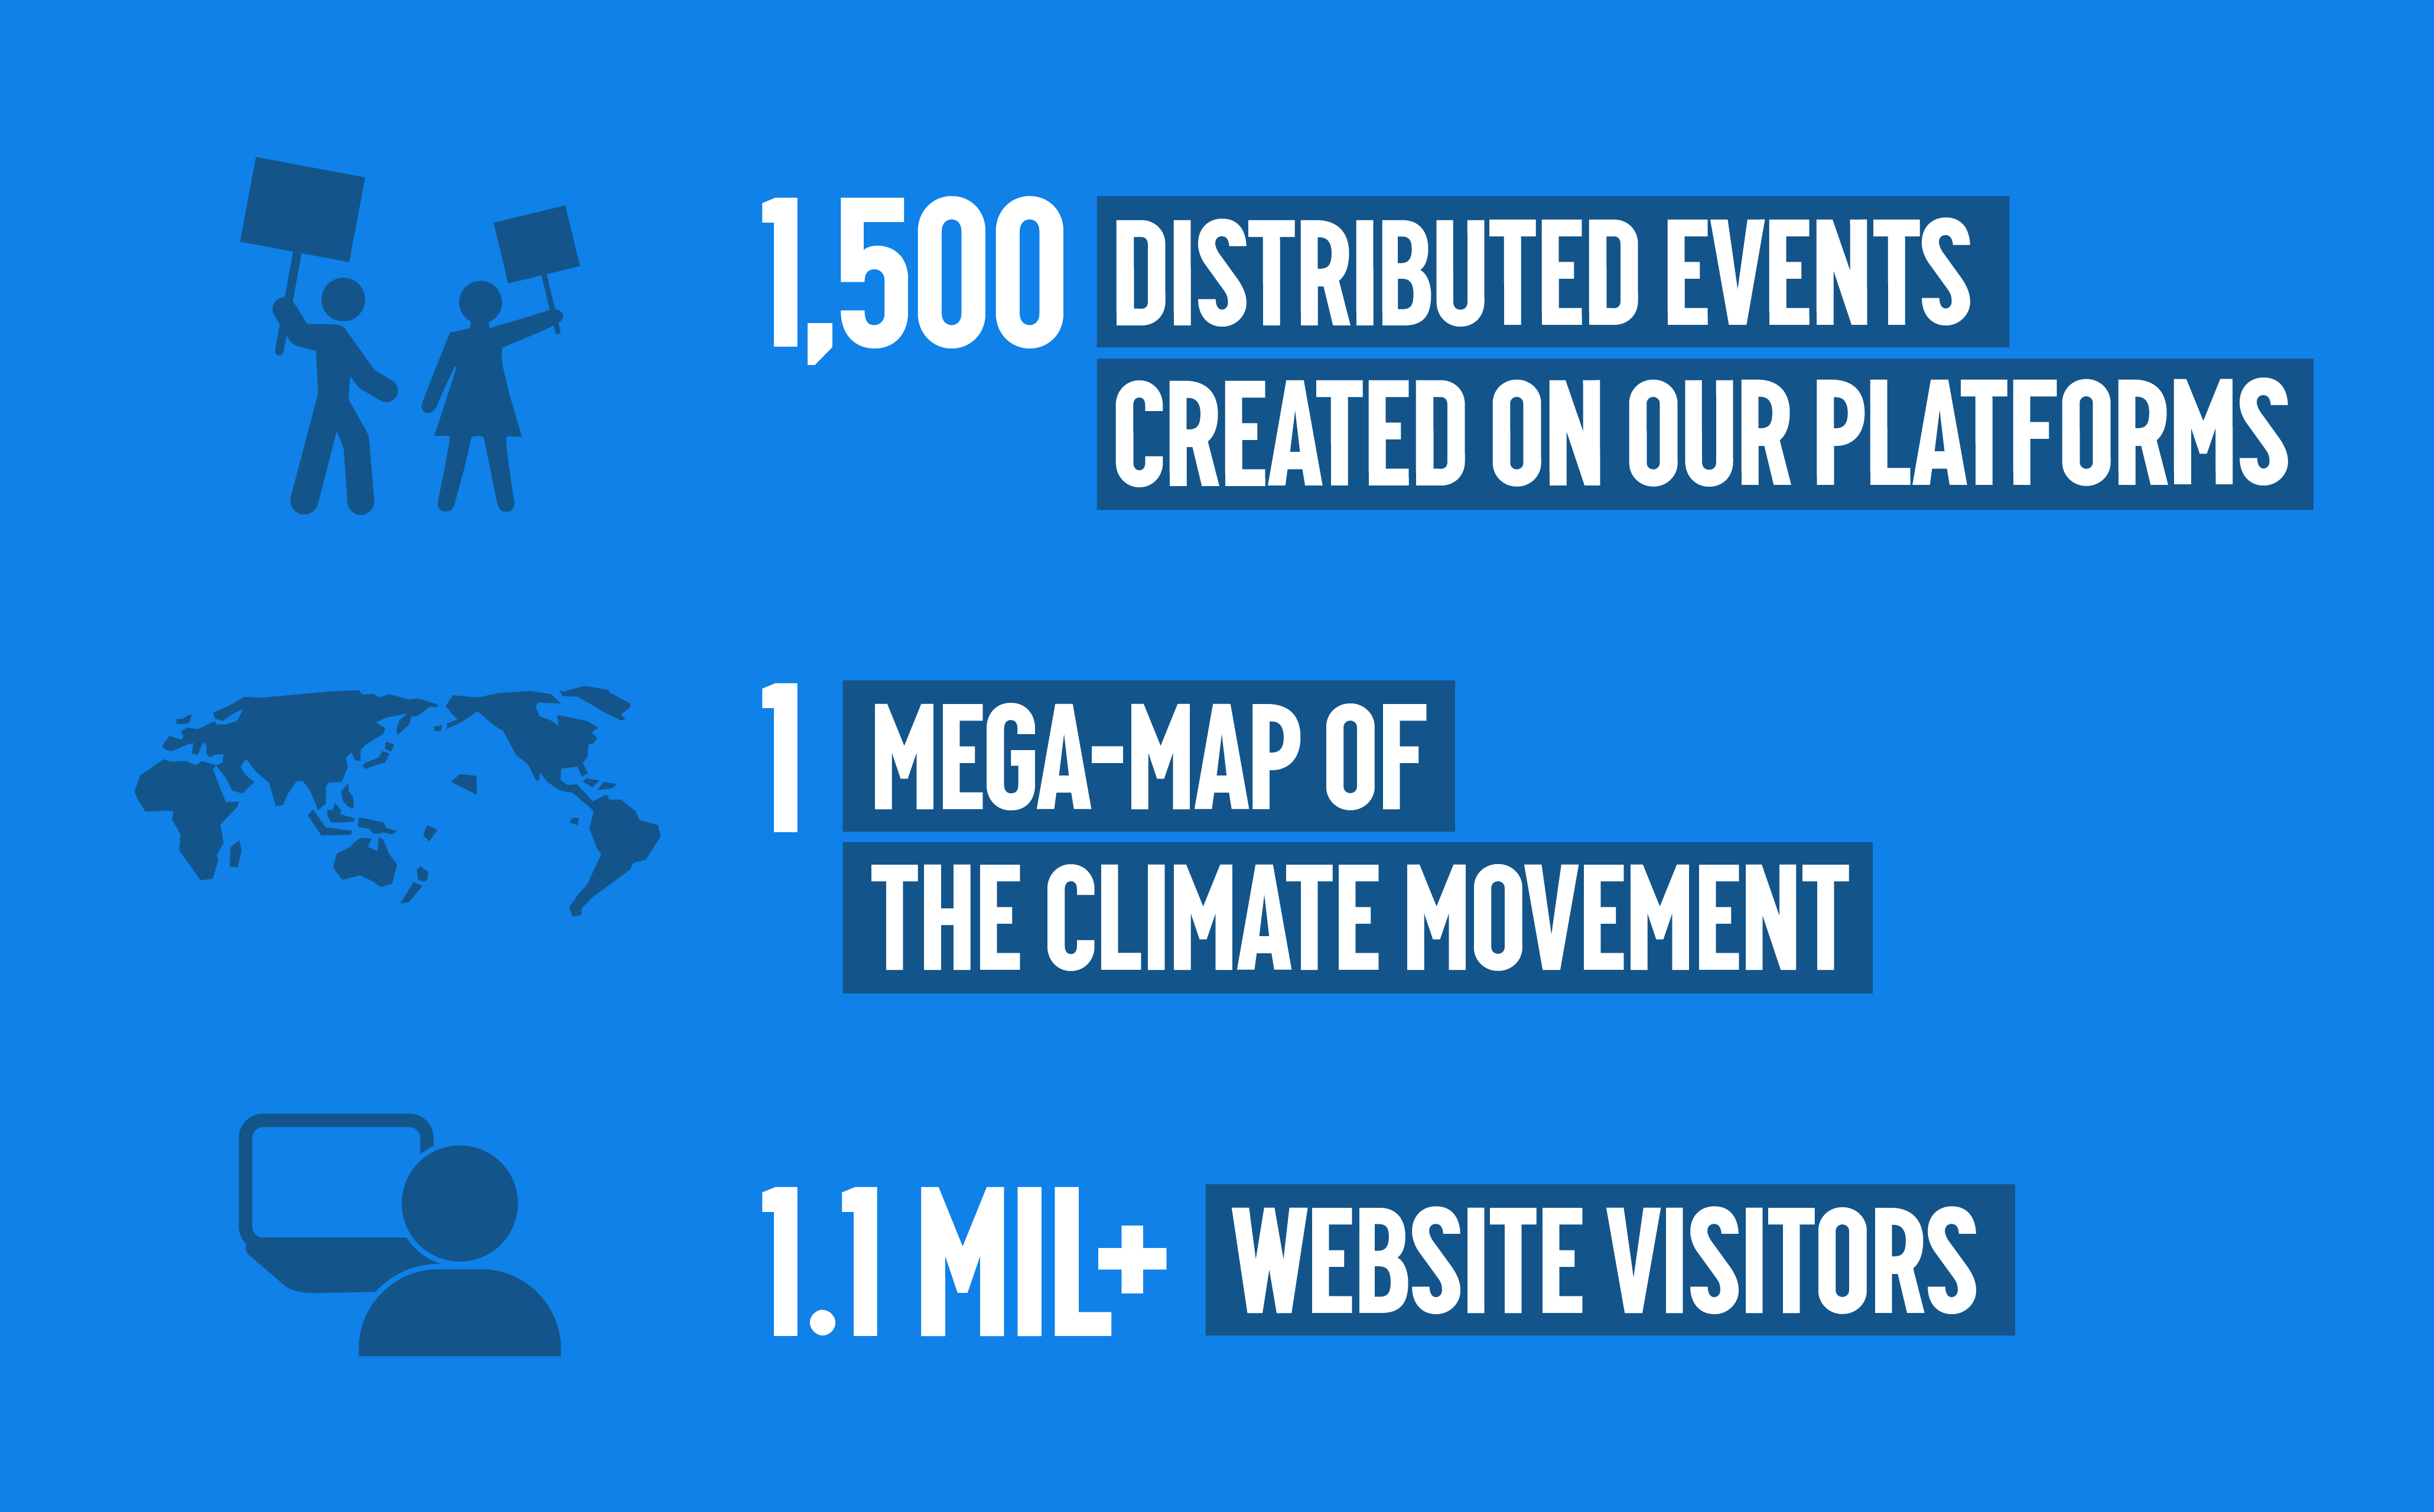 1,500 distributed events created on our platforms, 1 mega-map of the climate movement, 1.1 million + website visitors